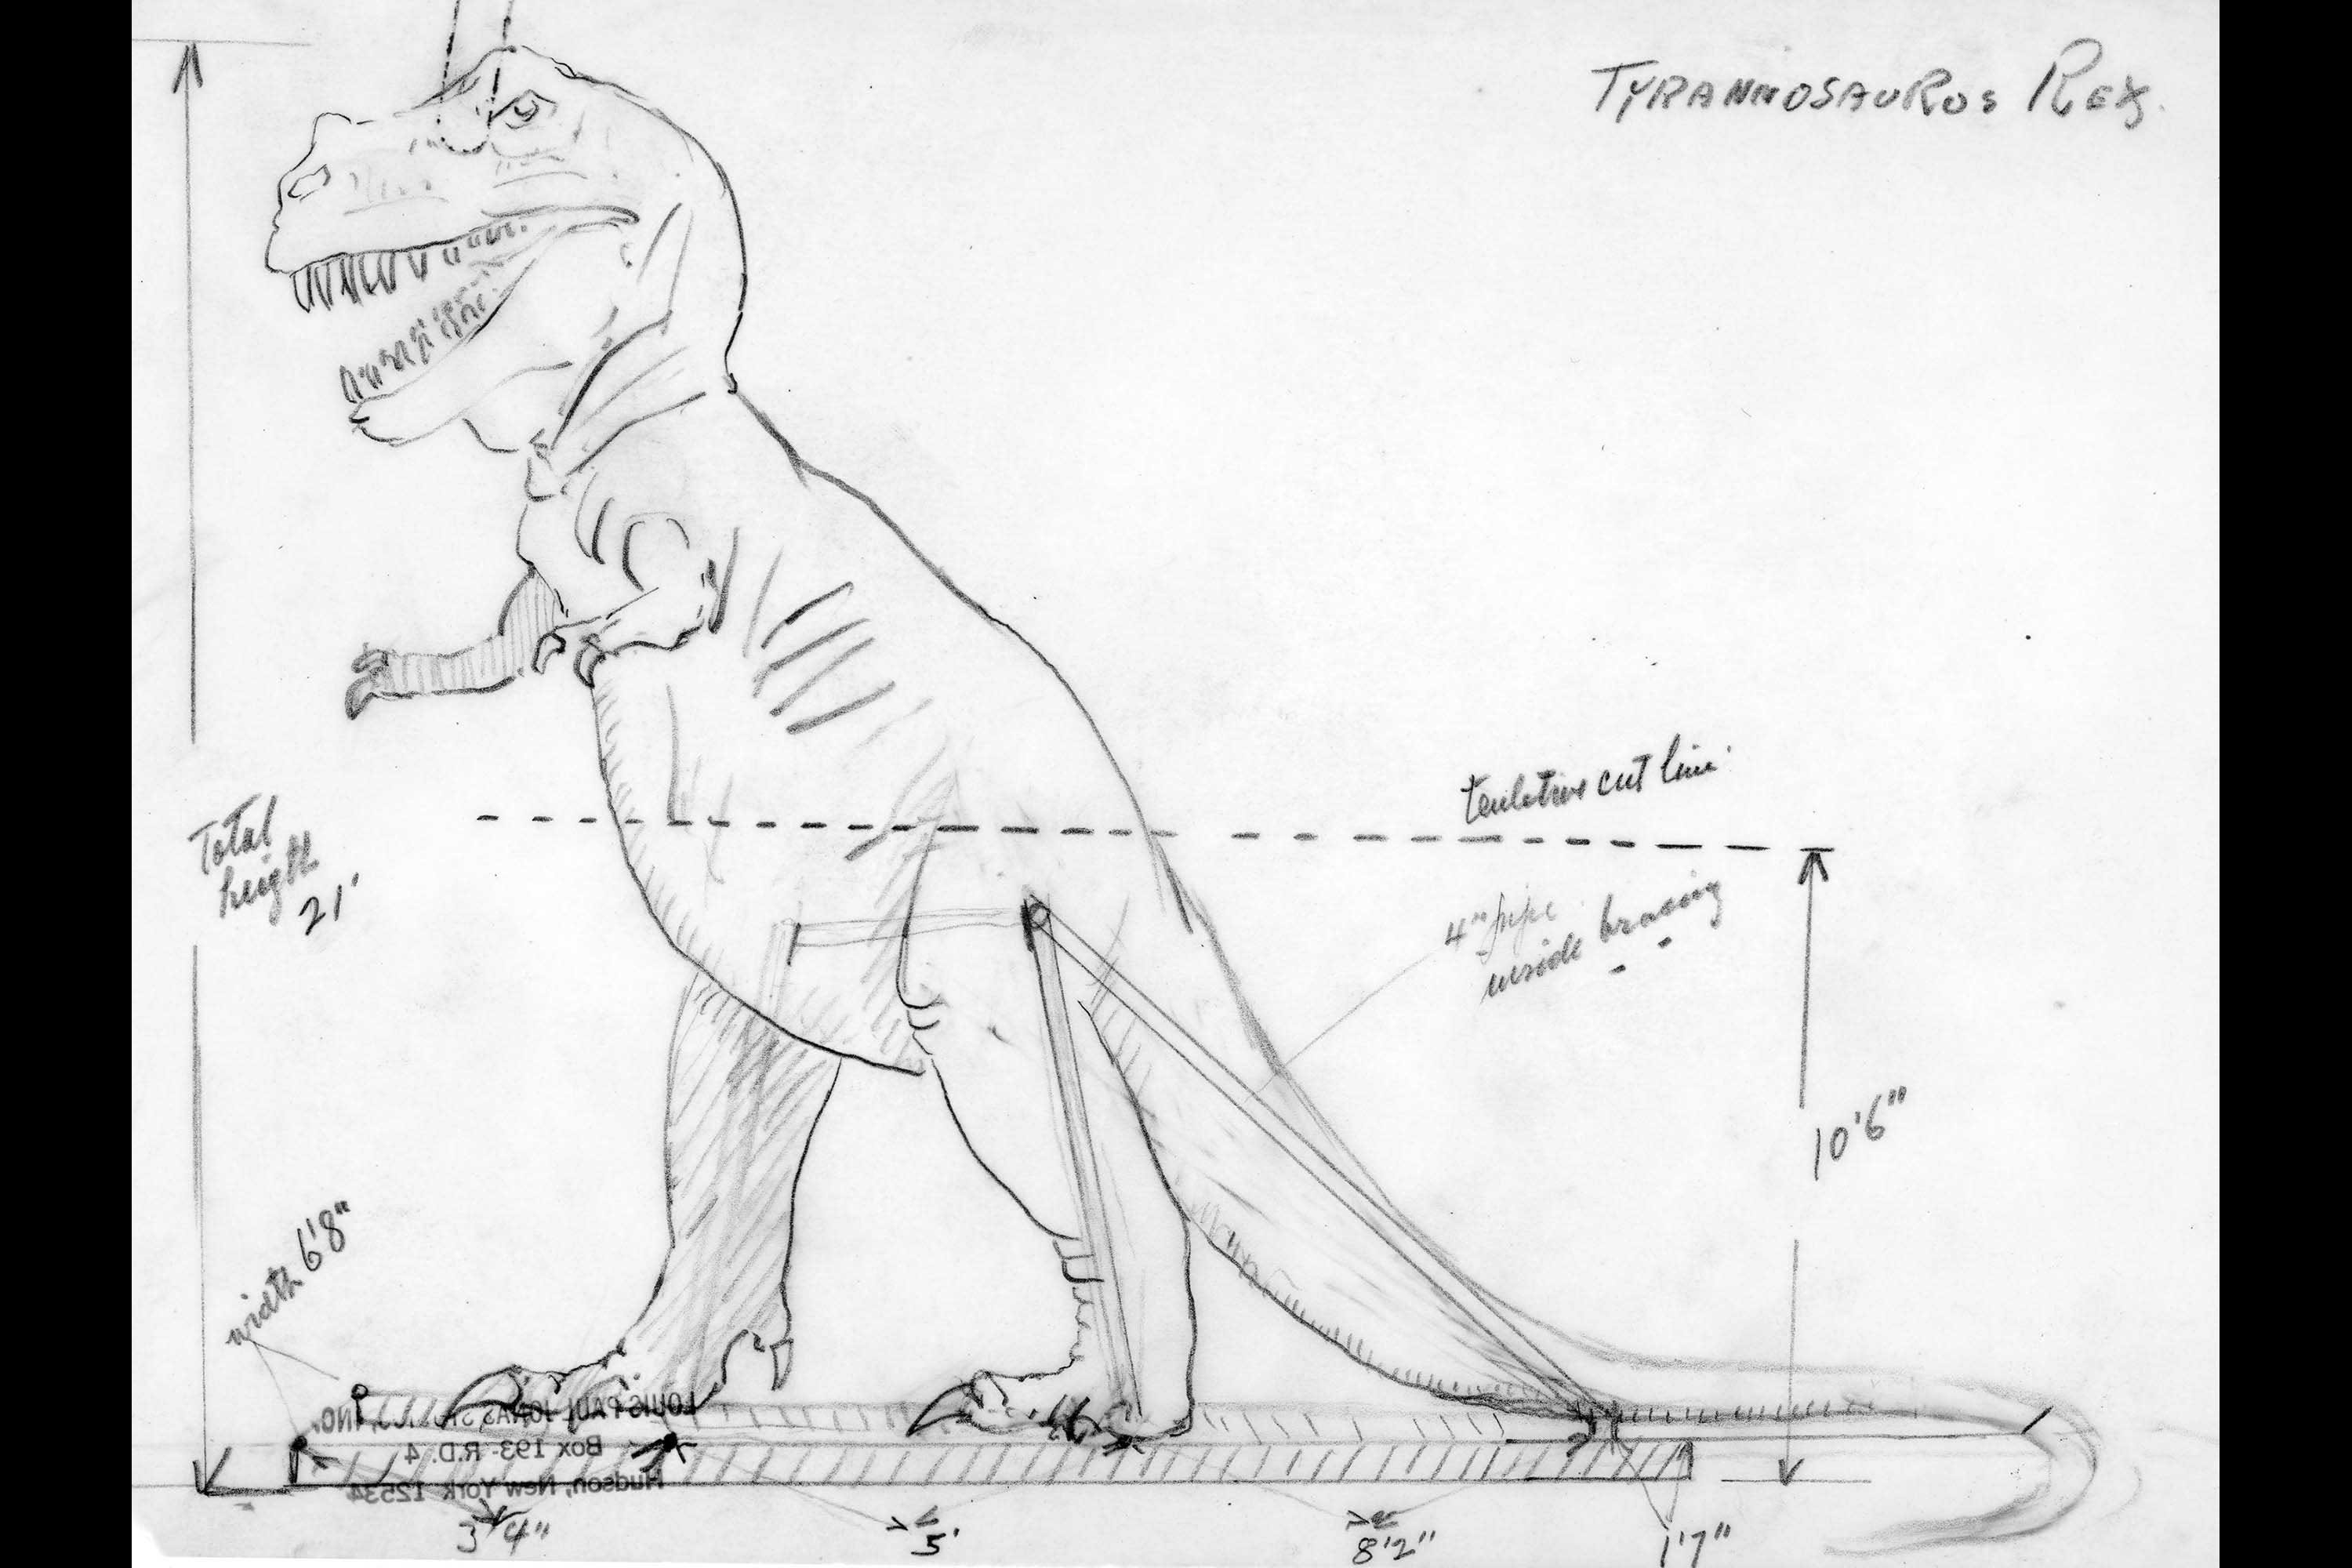 First Model T.rex Sketches. These are various pencil sketch designs for the T.rex model.